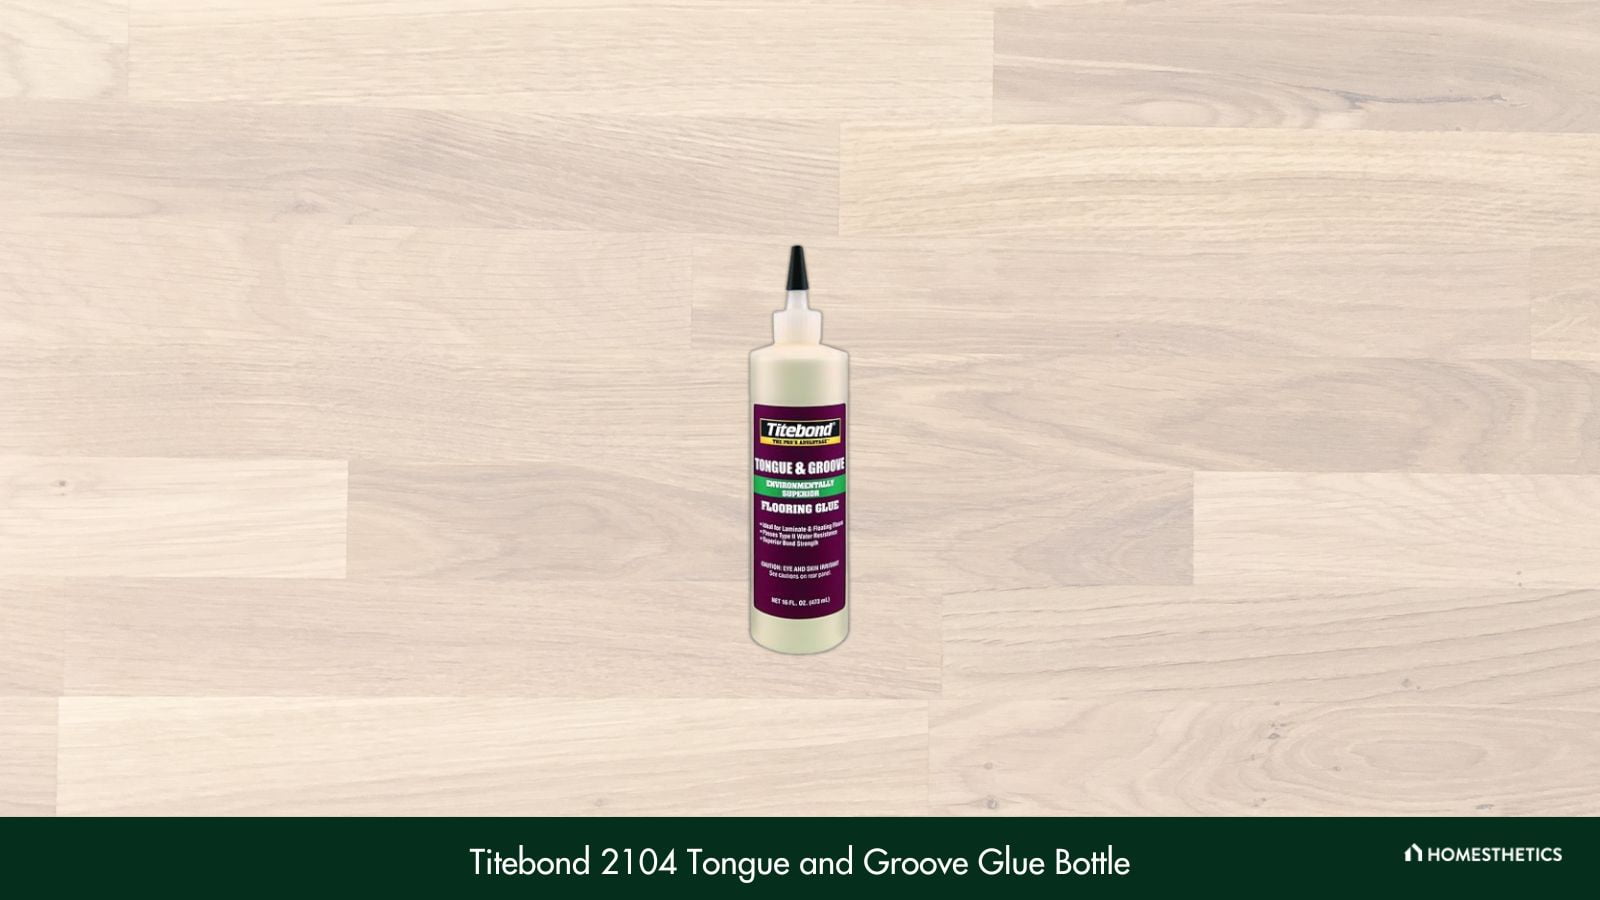 Titebond 2104 Tongue and Groove Glue Bottle